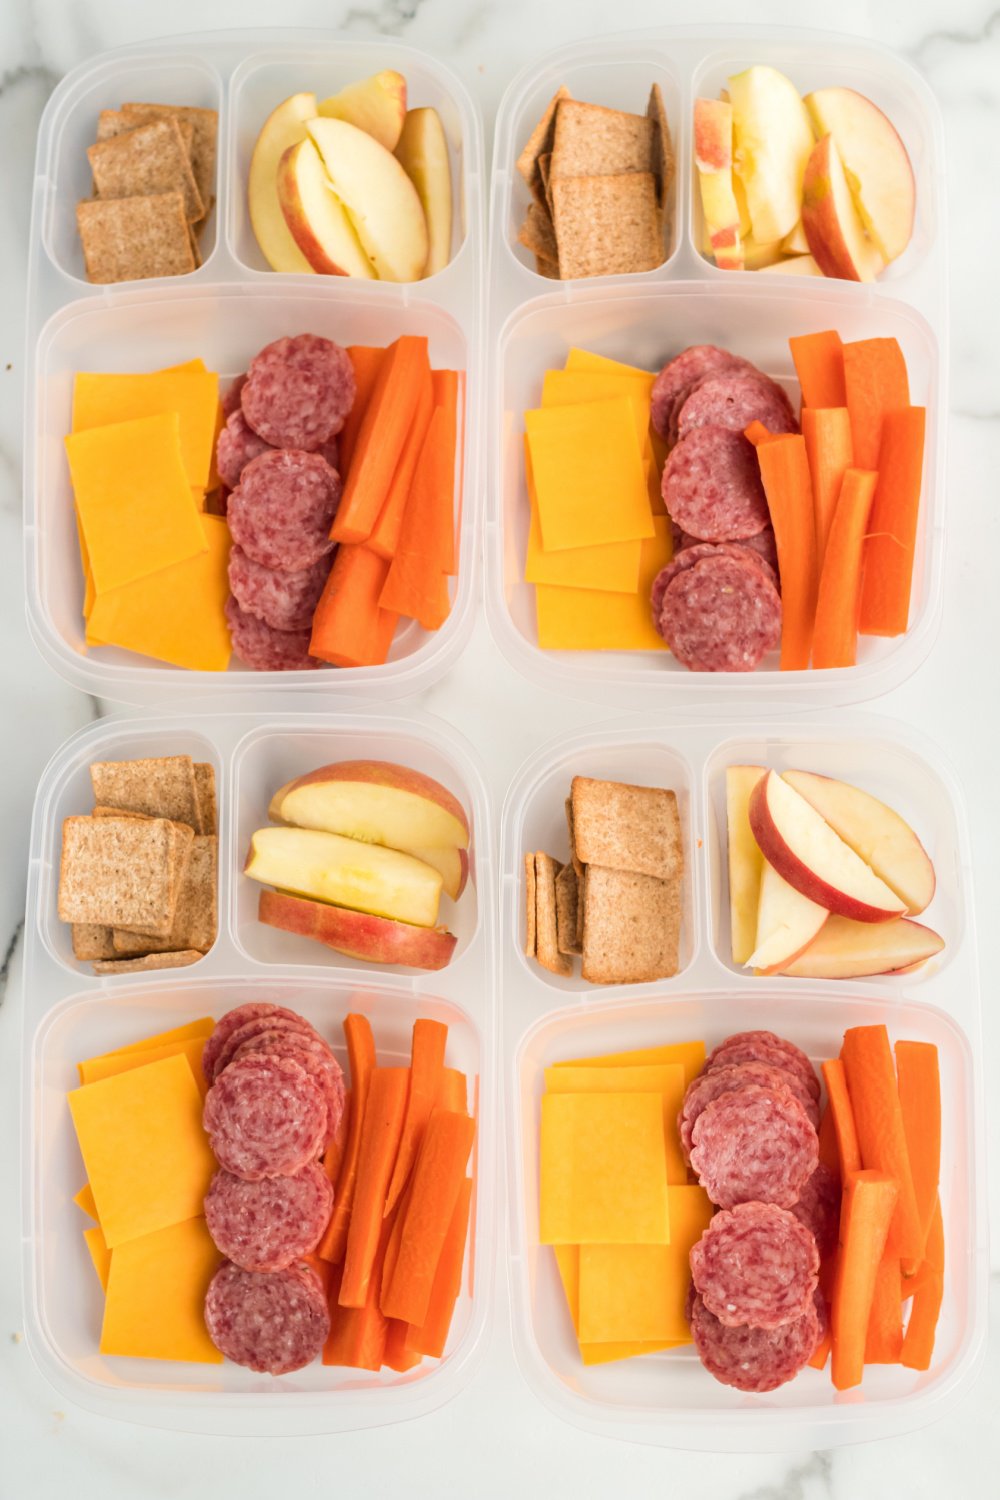 Salami Cheese and Crackers Lunchbox Idea